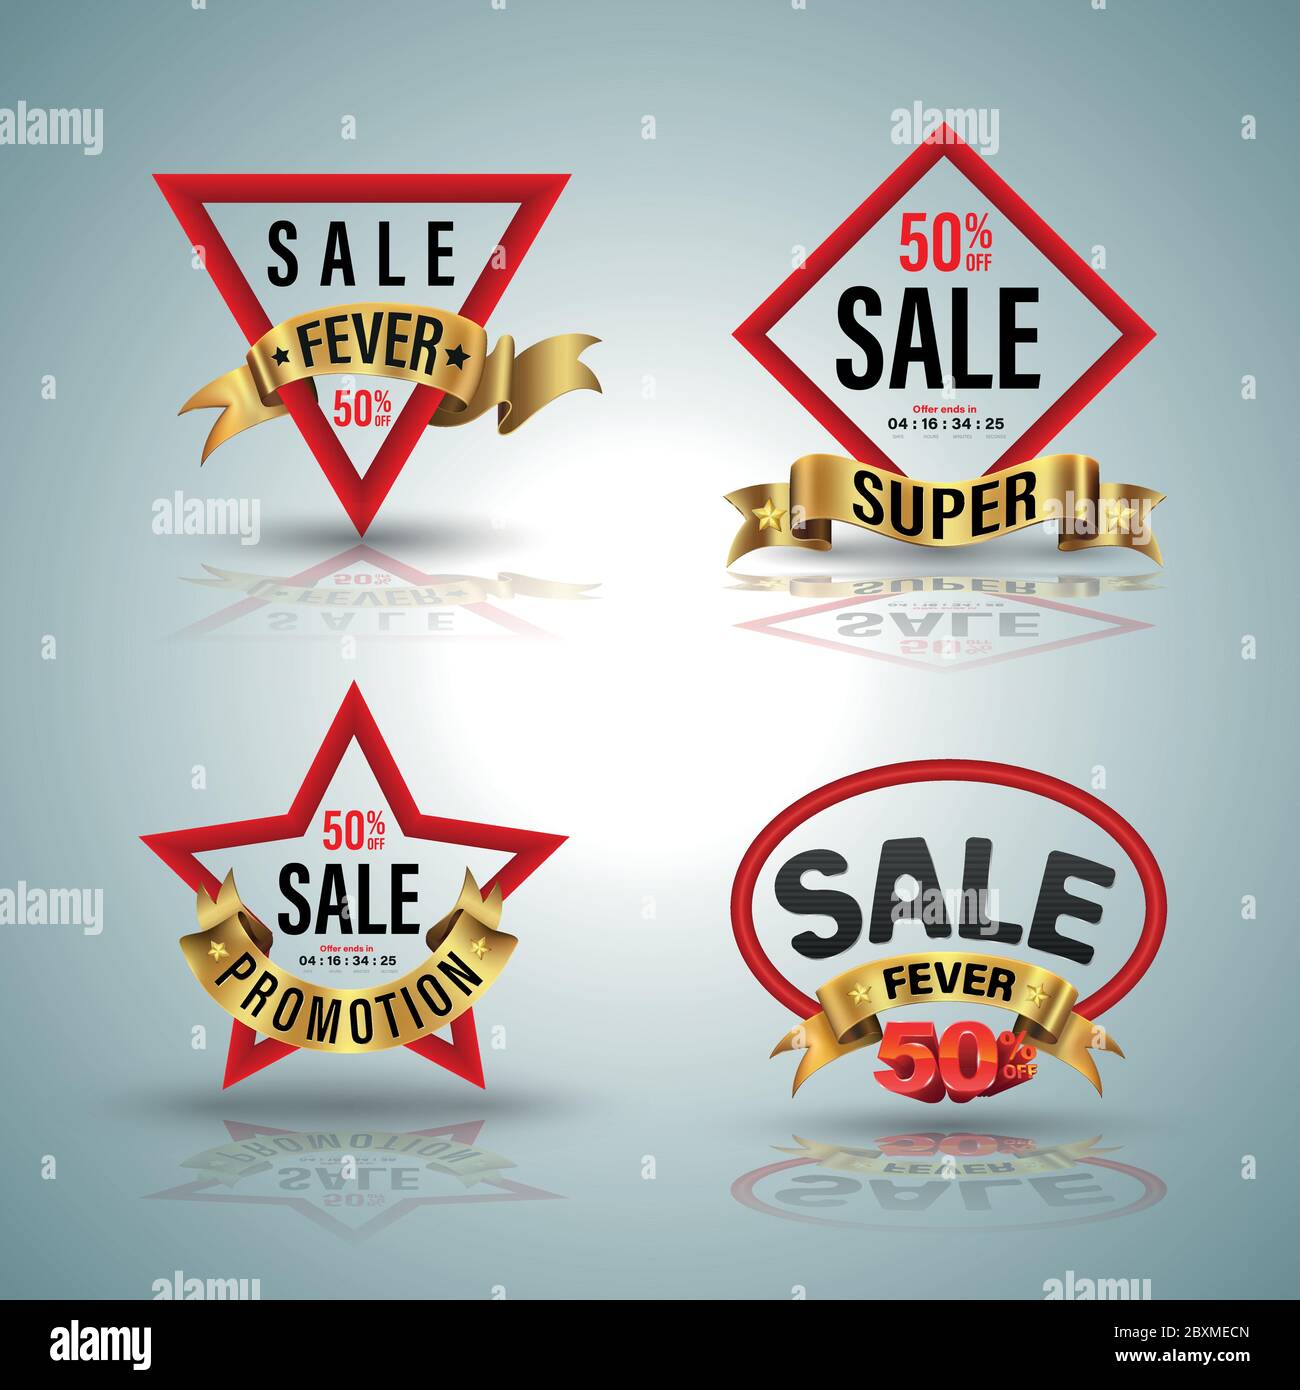 Sale banner. Vector illustration for promotion advertising. Stock Vector